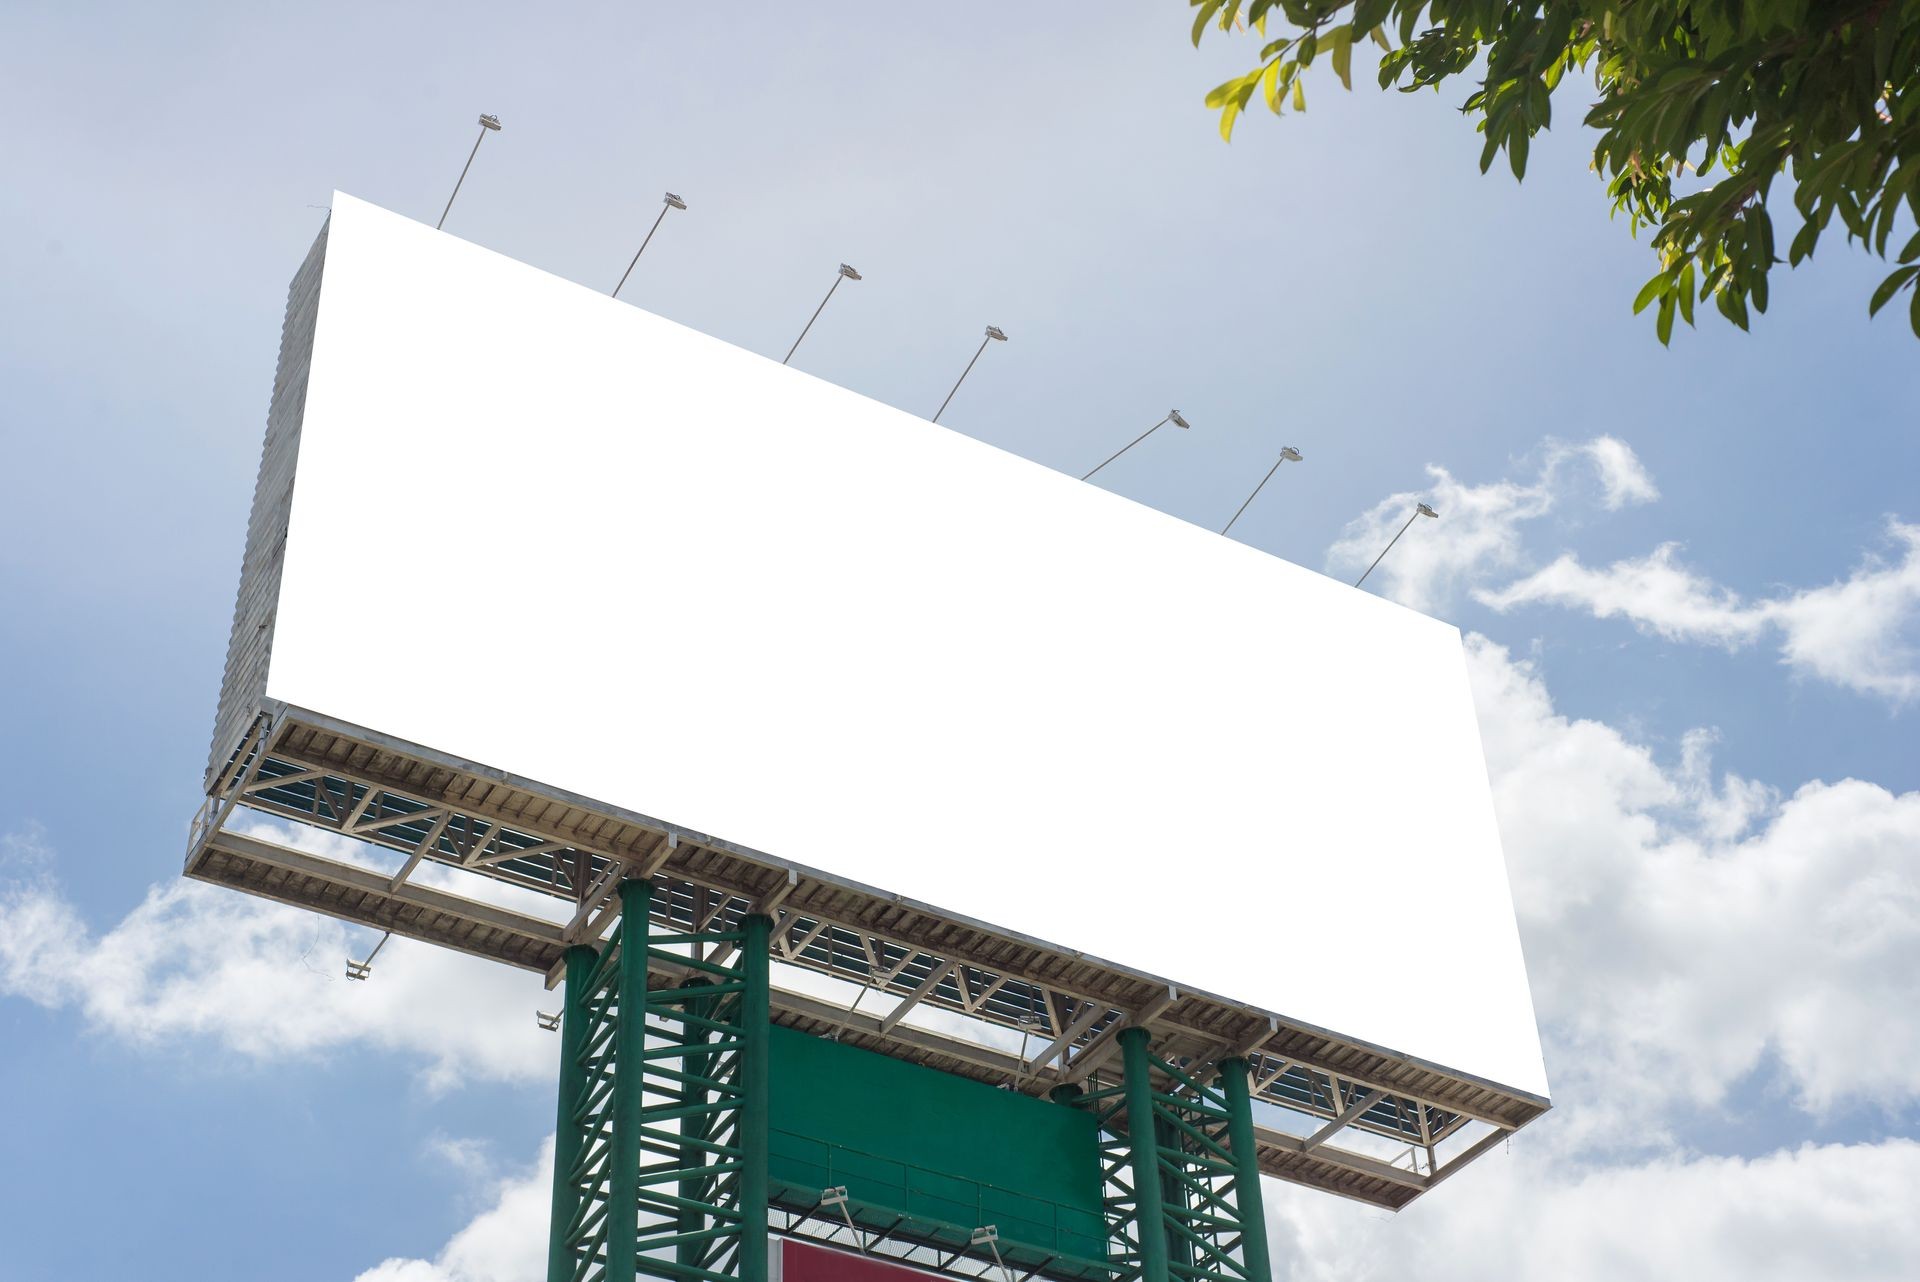 billboard blank on road in city for advertising background.